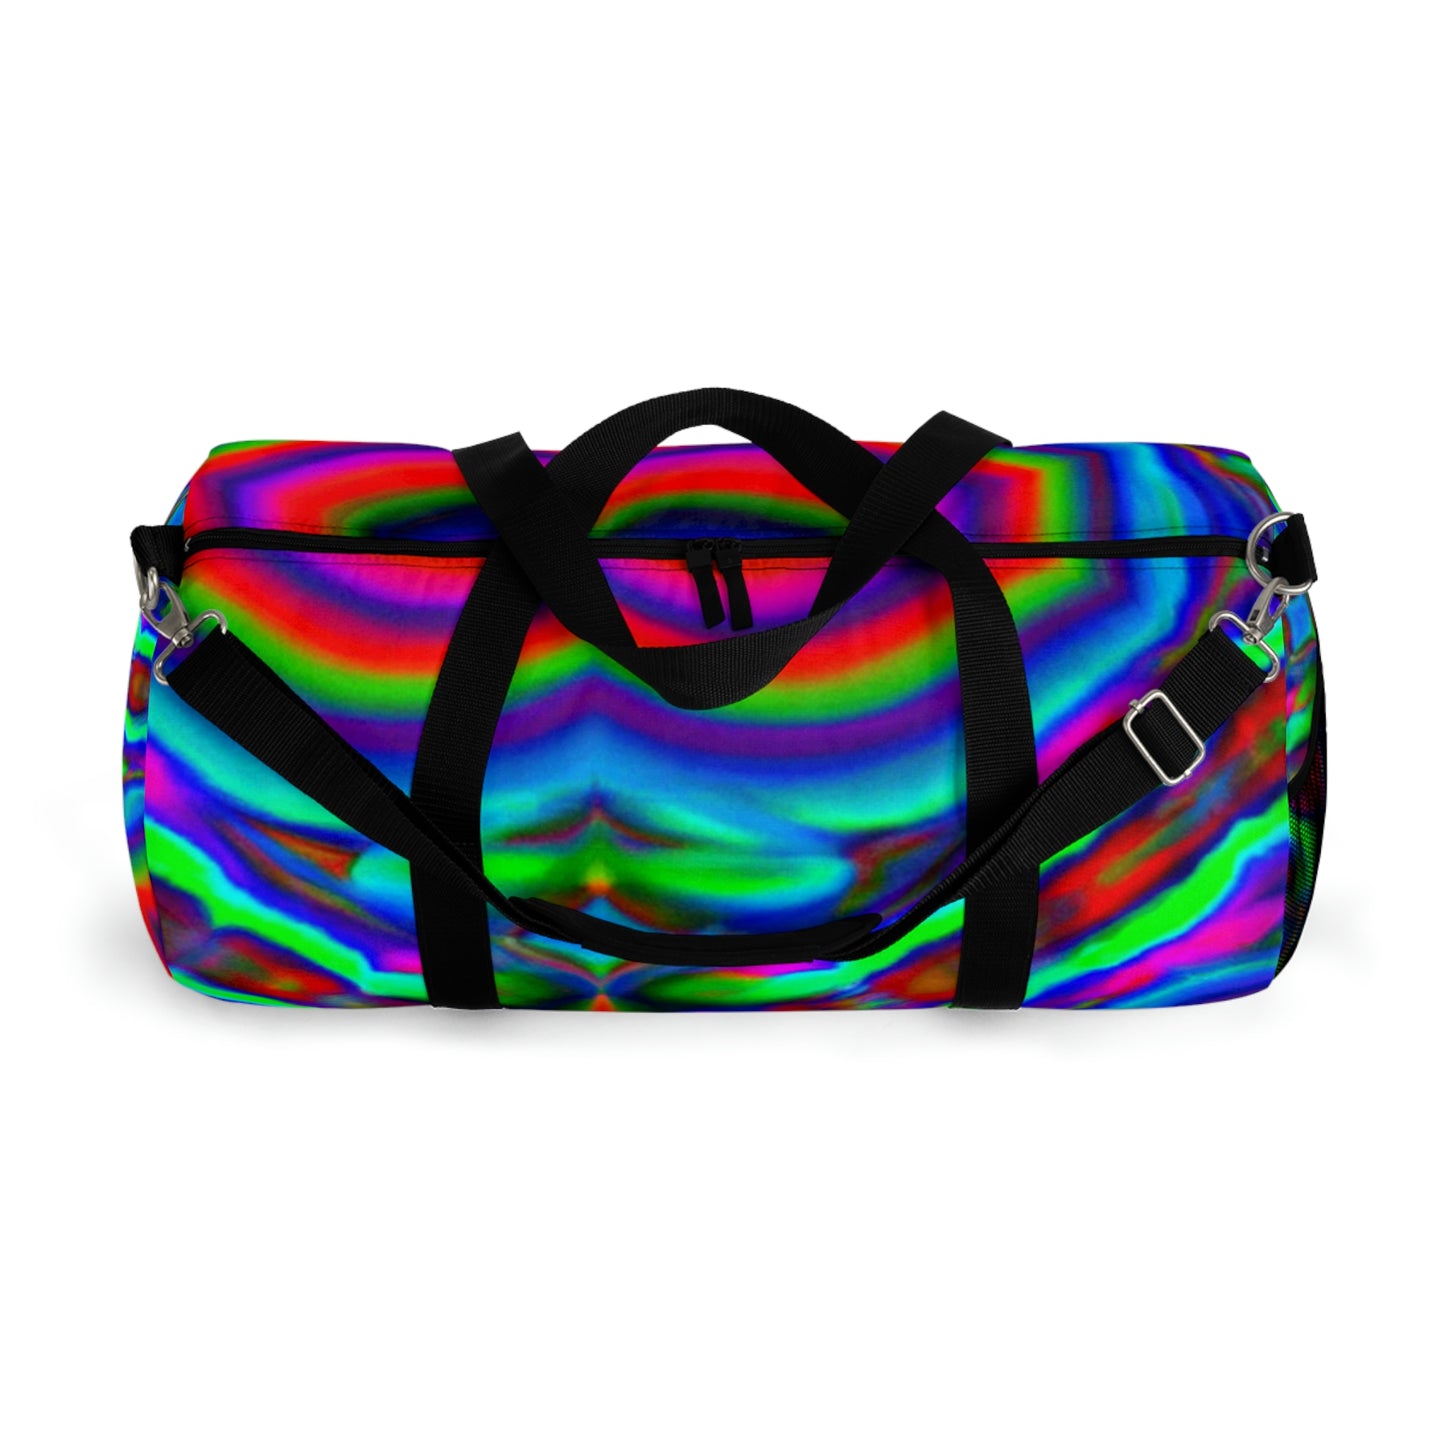 Luxiano - Psychedelic Duffel Bag